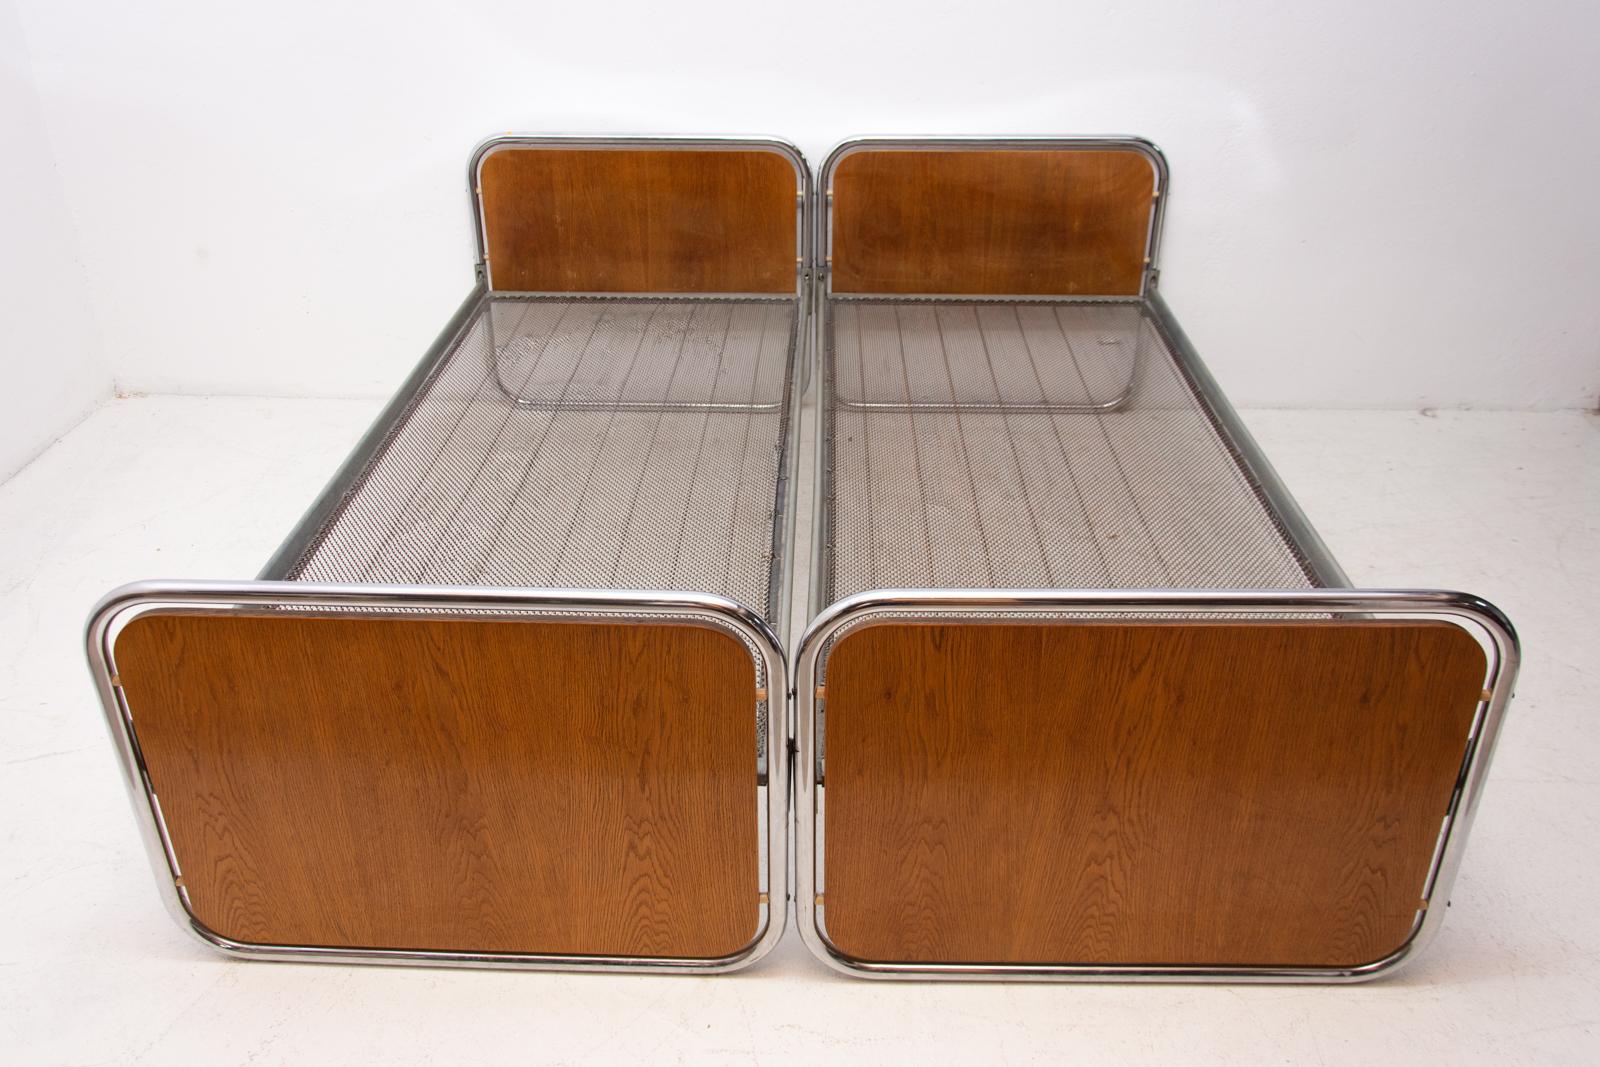 Pair of functionalist chromed beds. Outstanding timeless design. It was produced by Kovona company in the former Czechoslovakia in the 1950s.

It's made of wood and chrome. It's a typical example of Czechoslovak functionalism. Chrome is in very